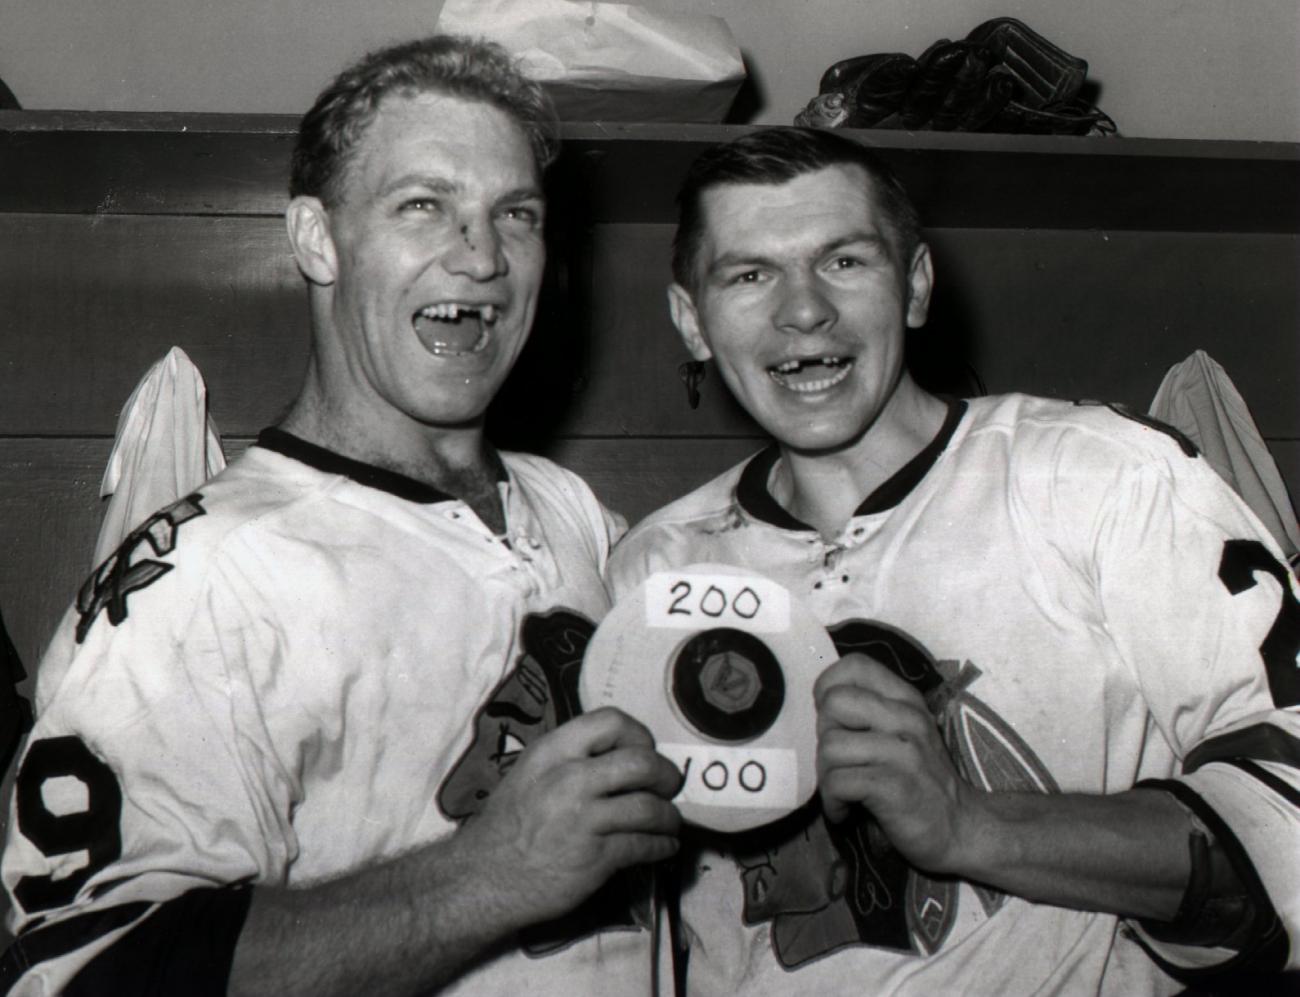 Stan Mikita poses smiling with another man in white team jerseys holding a puck, both with their upper front teeth missing.